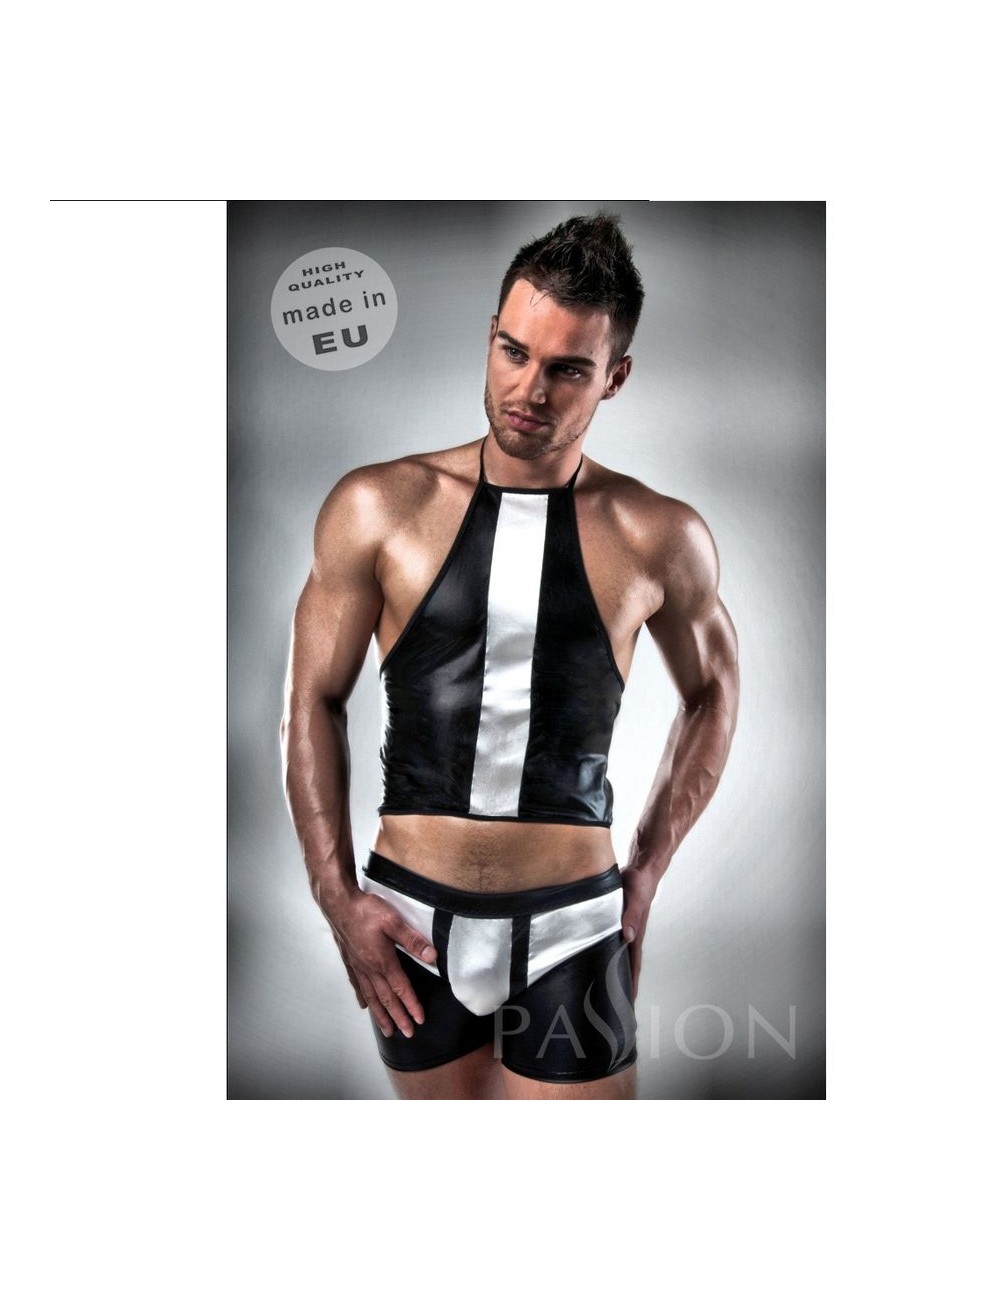 COMPLETO CAMERIERE SEXY BY PASSION MEN LINGERIE L / XL